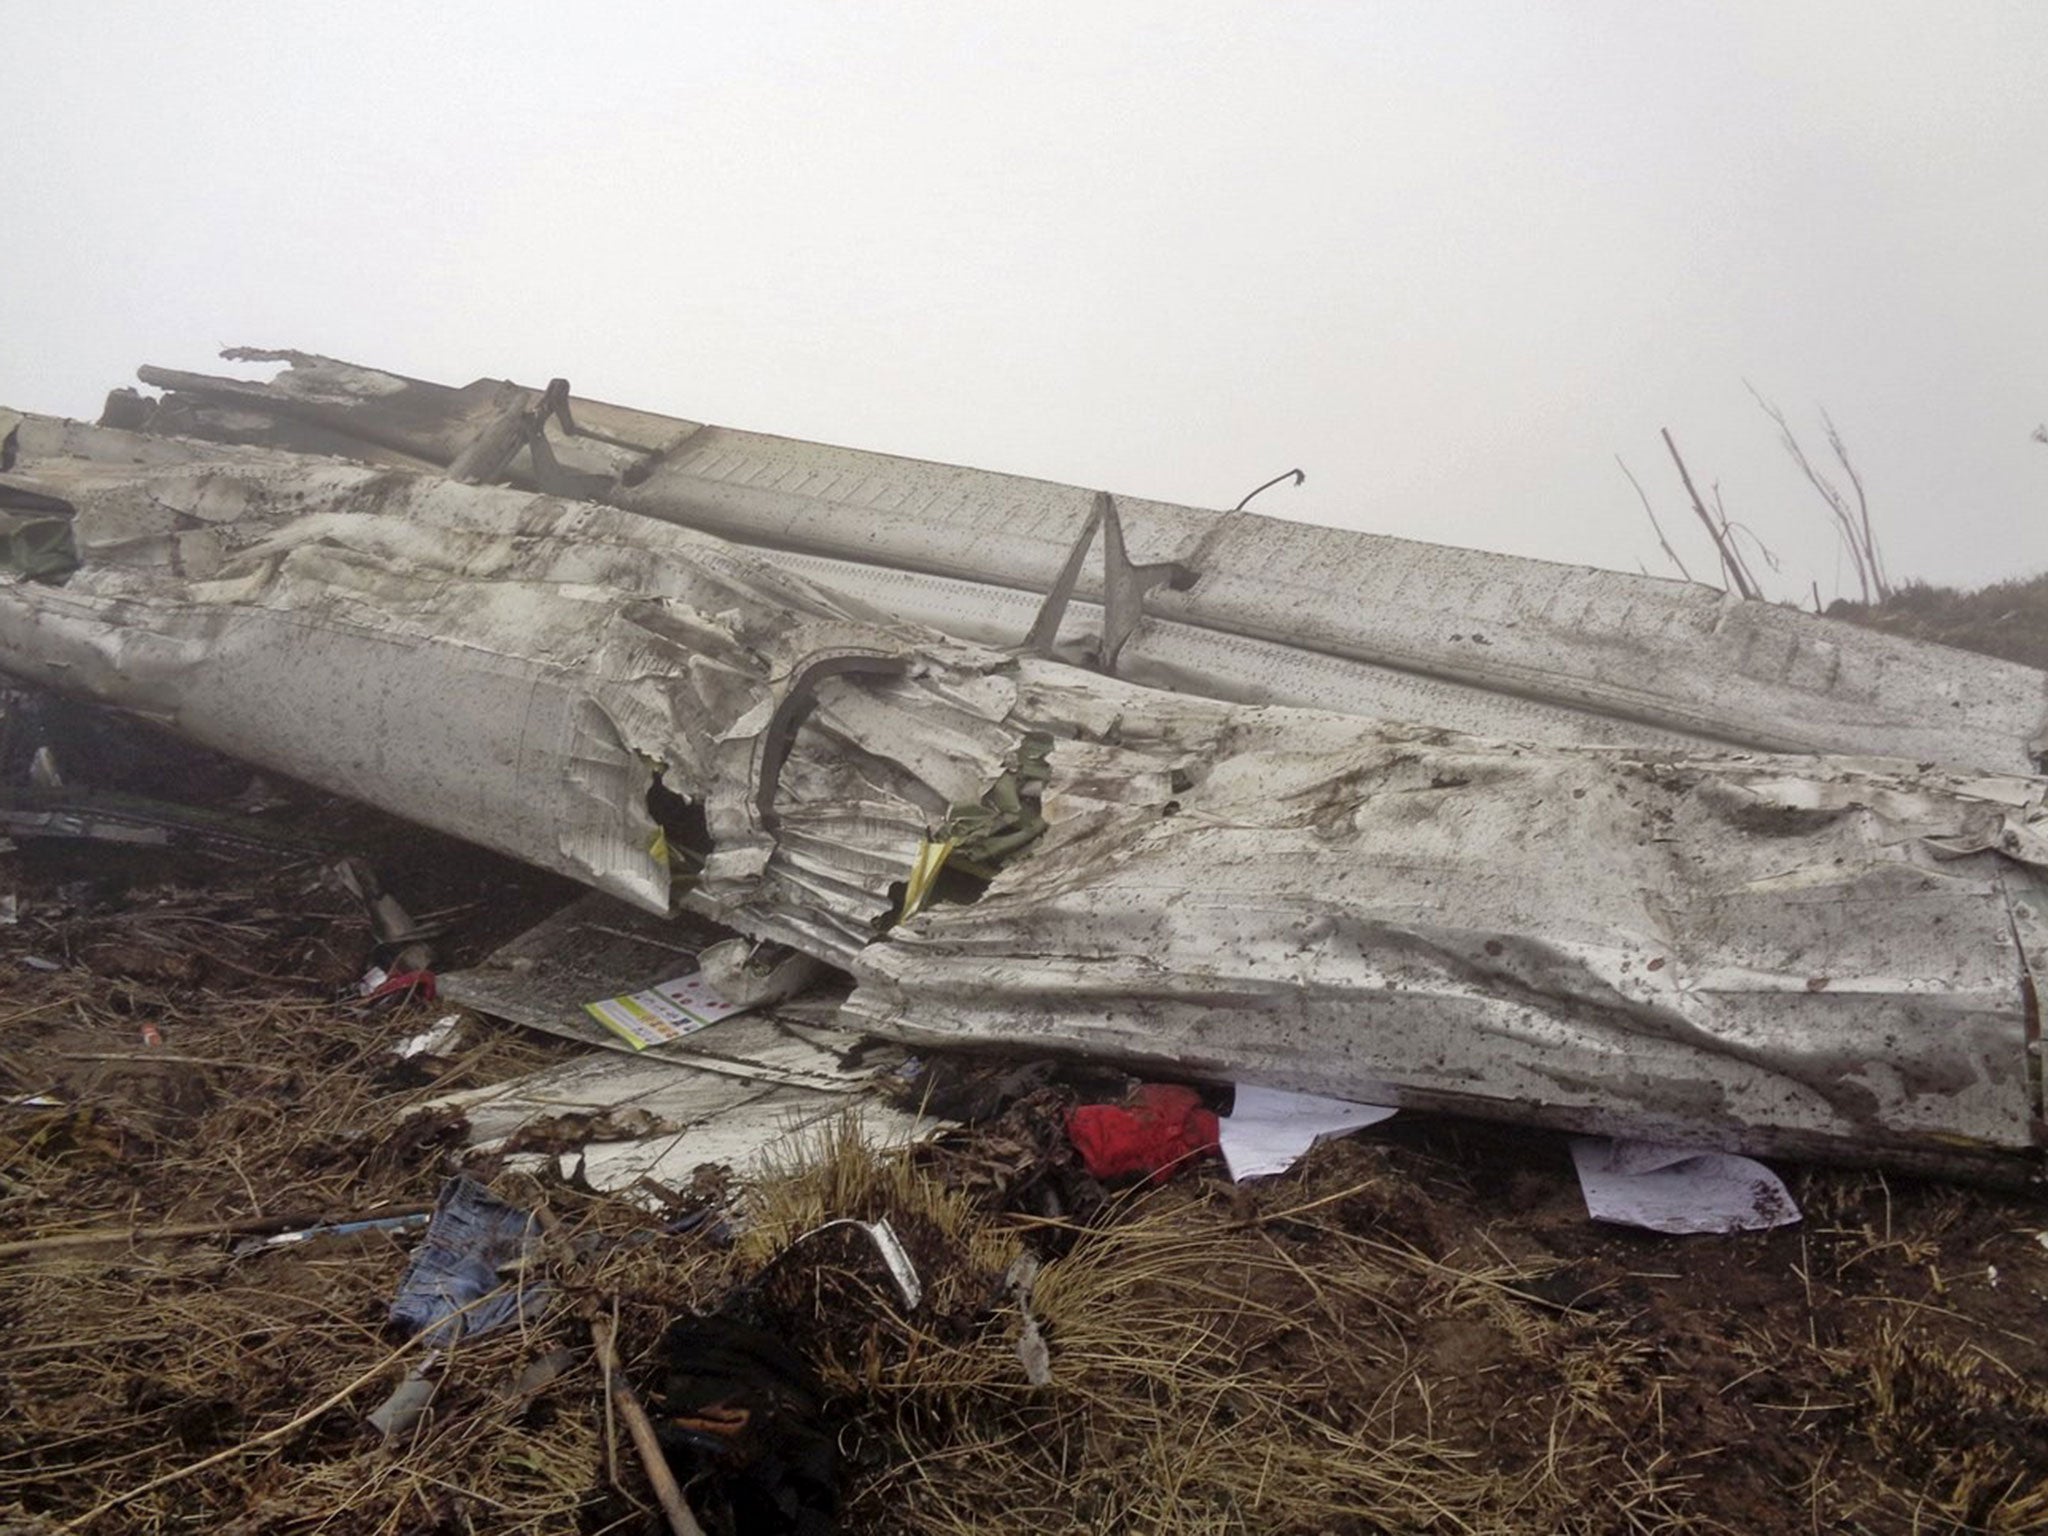 Wreckage of Twin Otter plane, operated by private Tara Air, is pictured after it crashed due to bad weather, in Myagdi, Nepal, February 24, 2016.